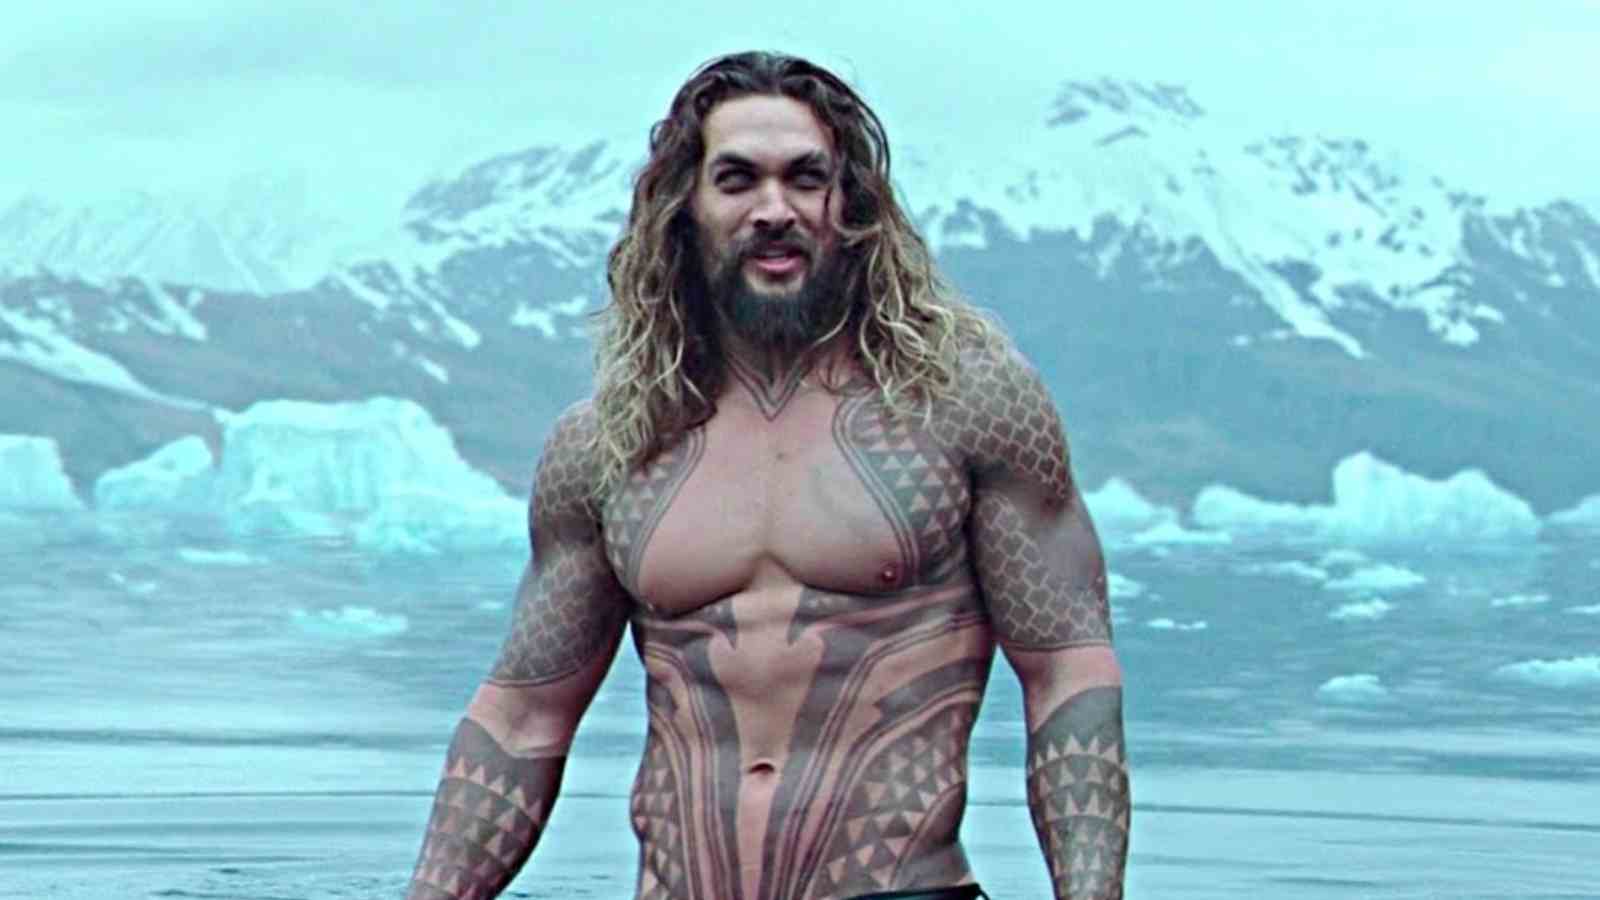 Is Jason Momoa Vegan? What Is His Daily Diet?